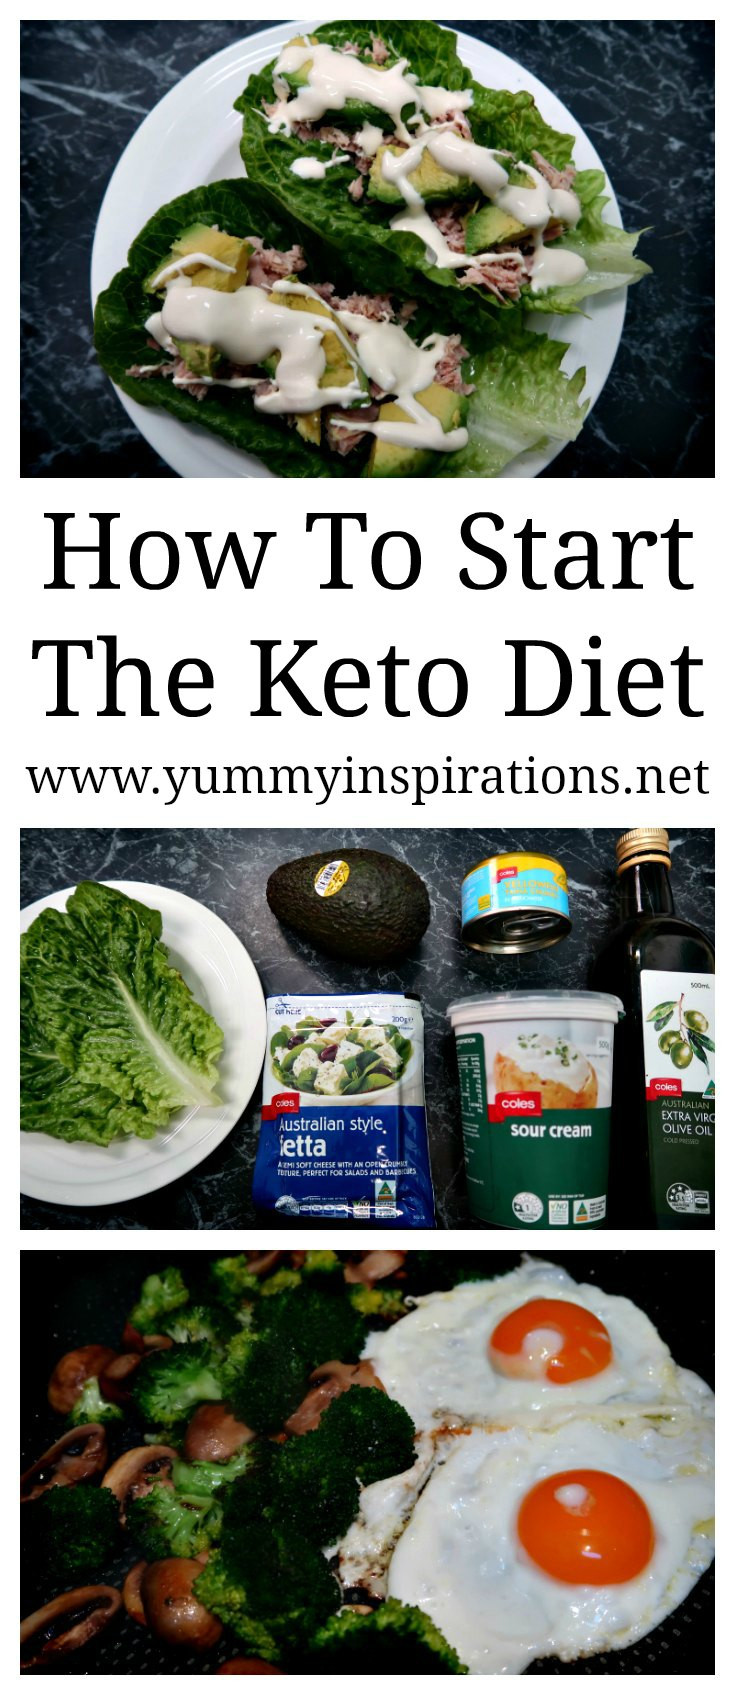 How To Start Ketosis Diet
 How To Start The Keto Diet Tips to help you started